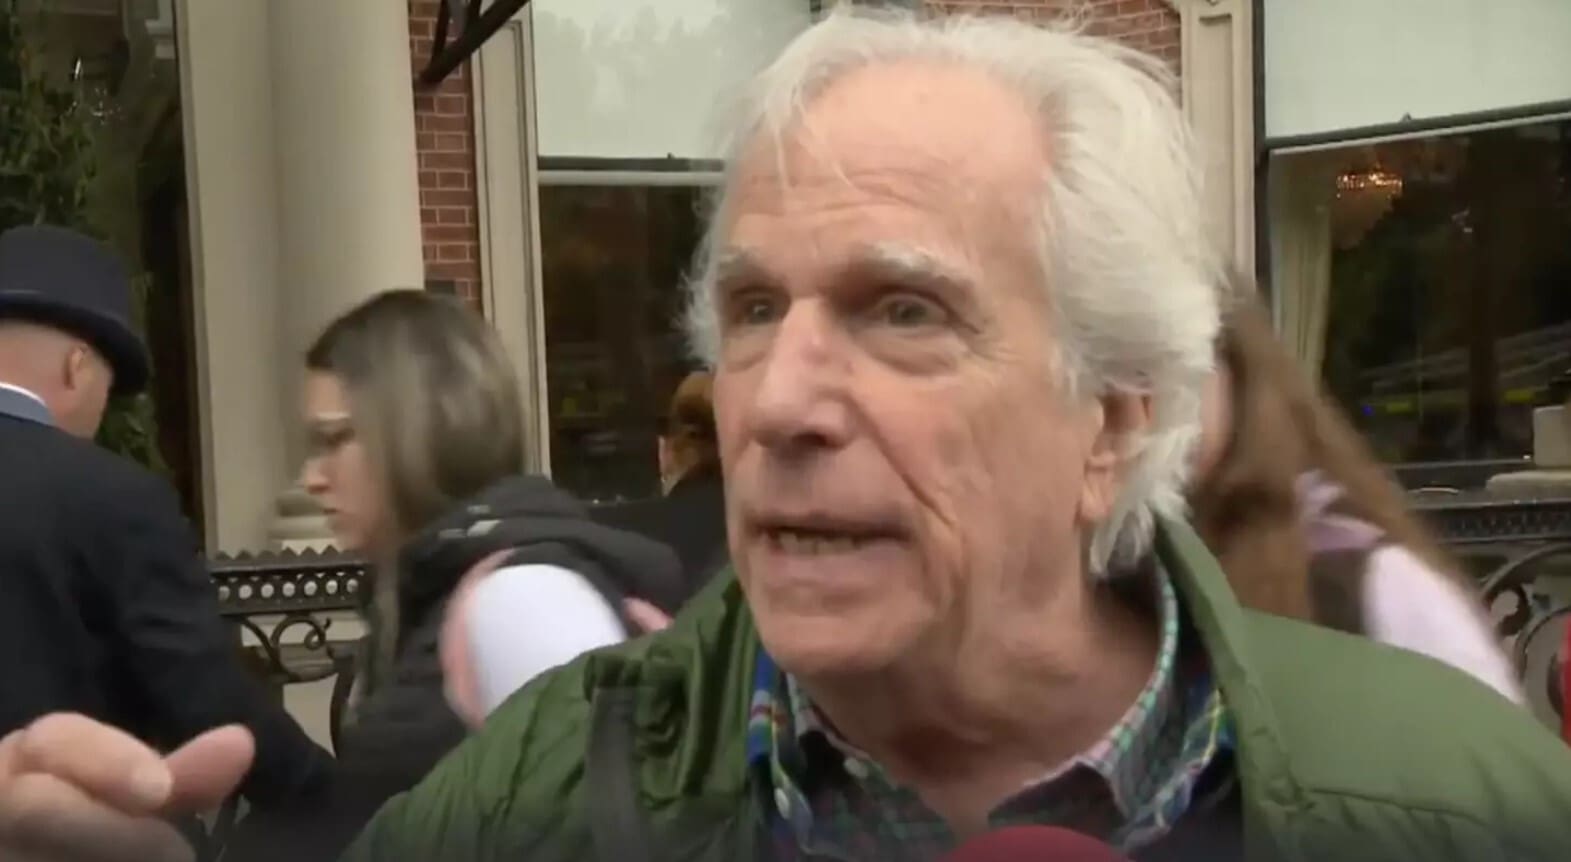 Man Interviewed About Dublin Hotel Fire Turns Out To Be Henry Winkler